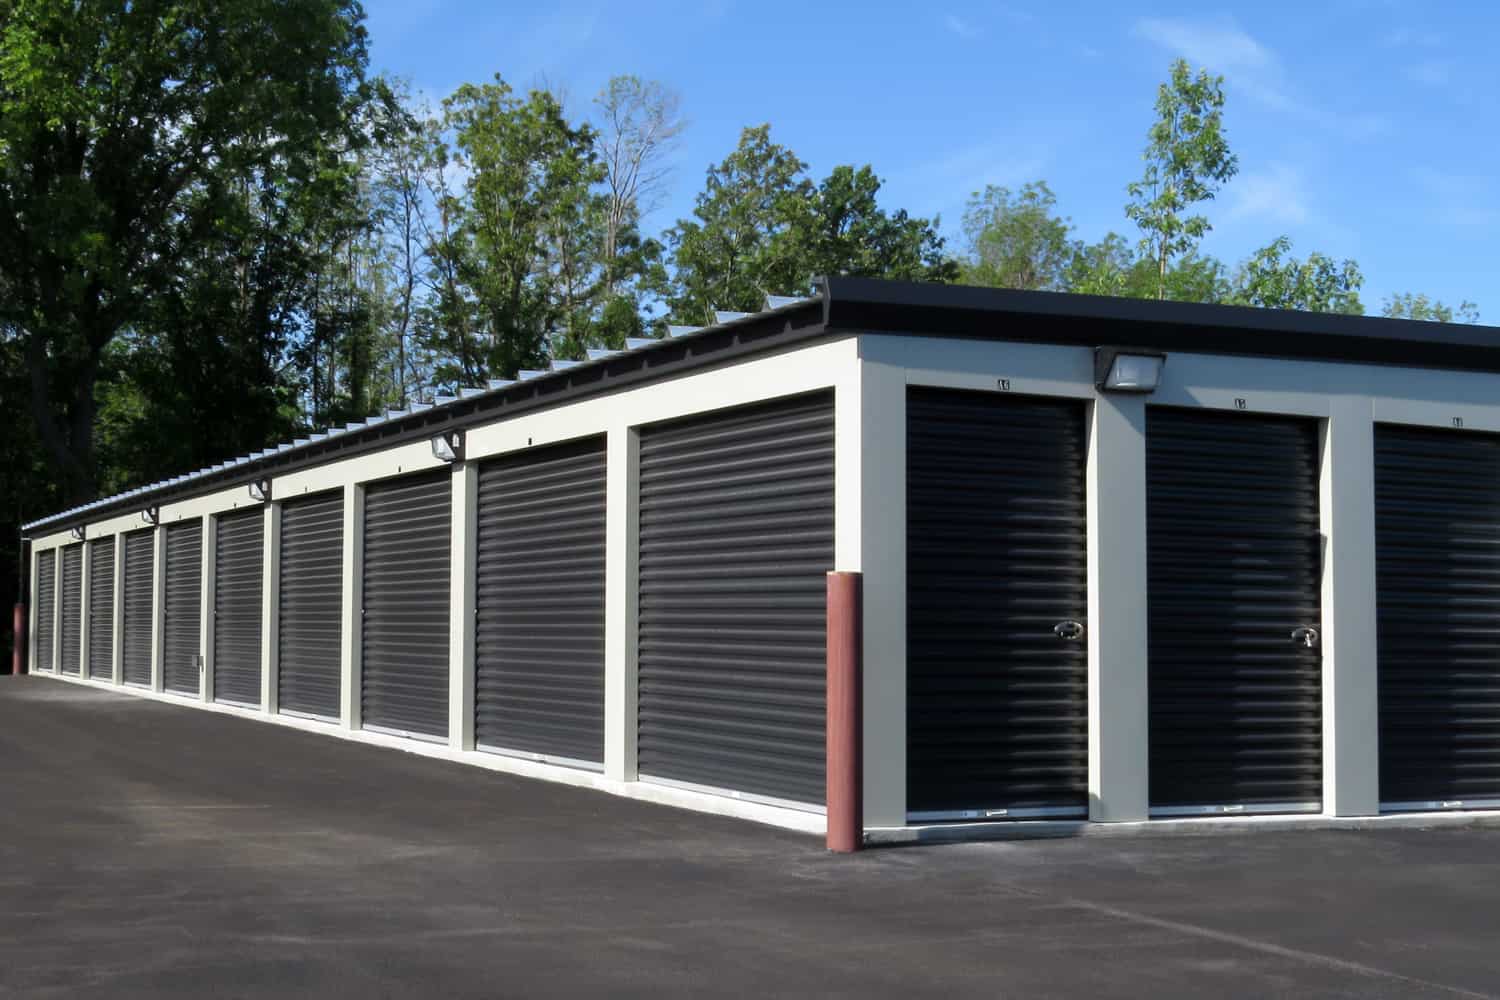 Self storage units with black garage doors for people who may need temporary or long term storage of their possessions.